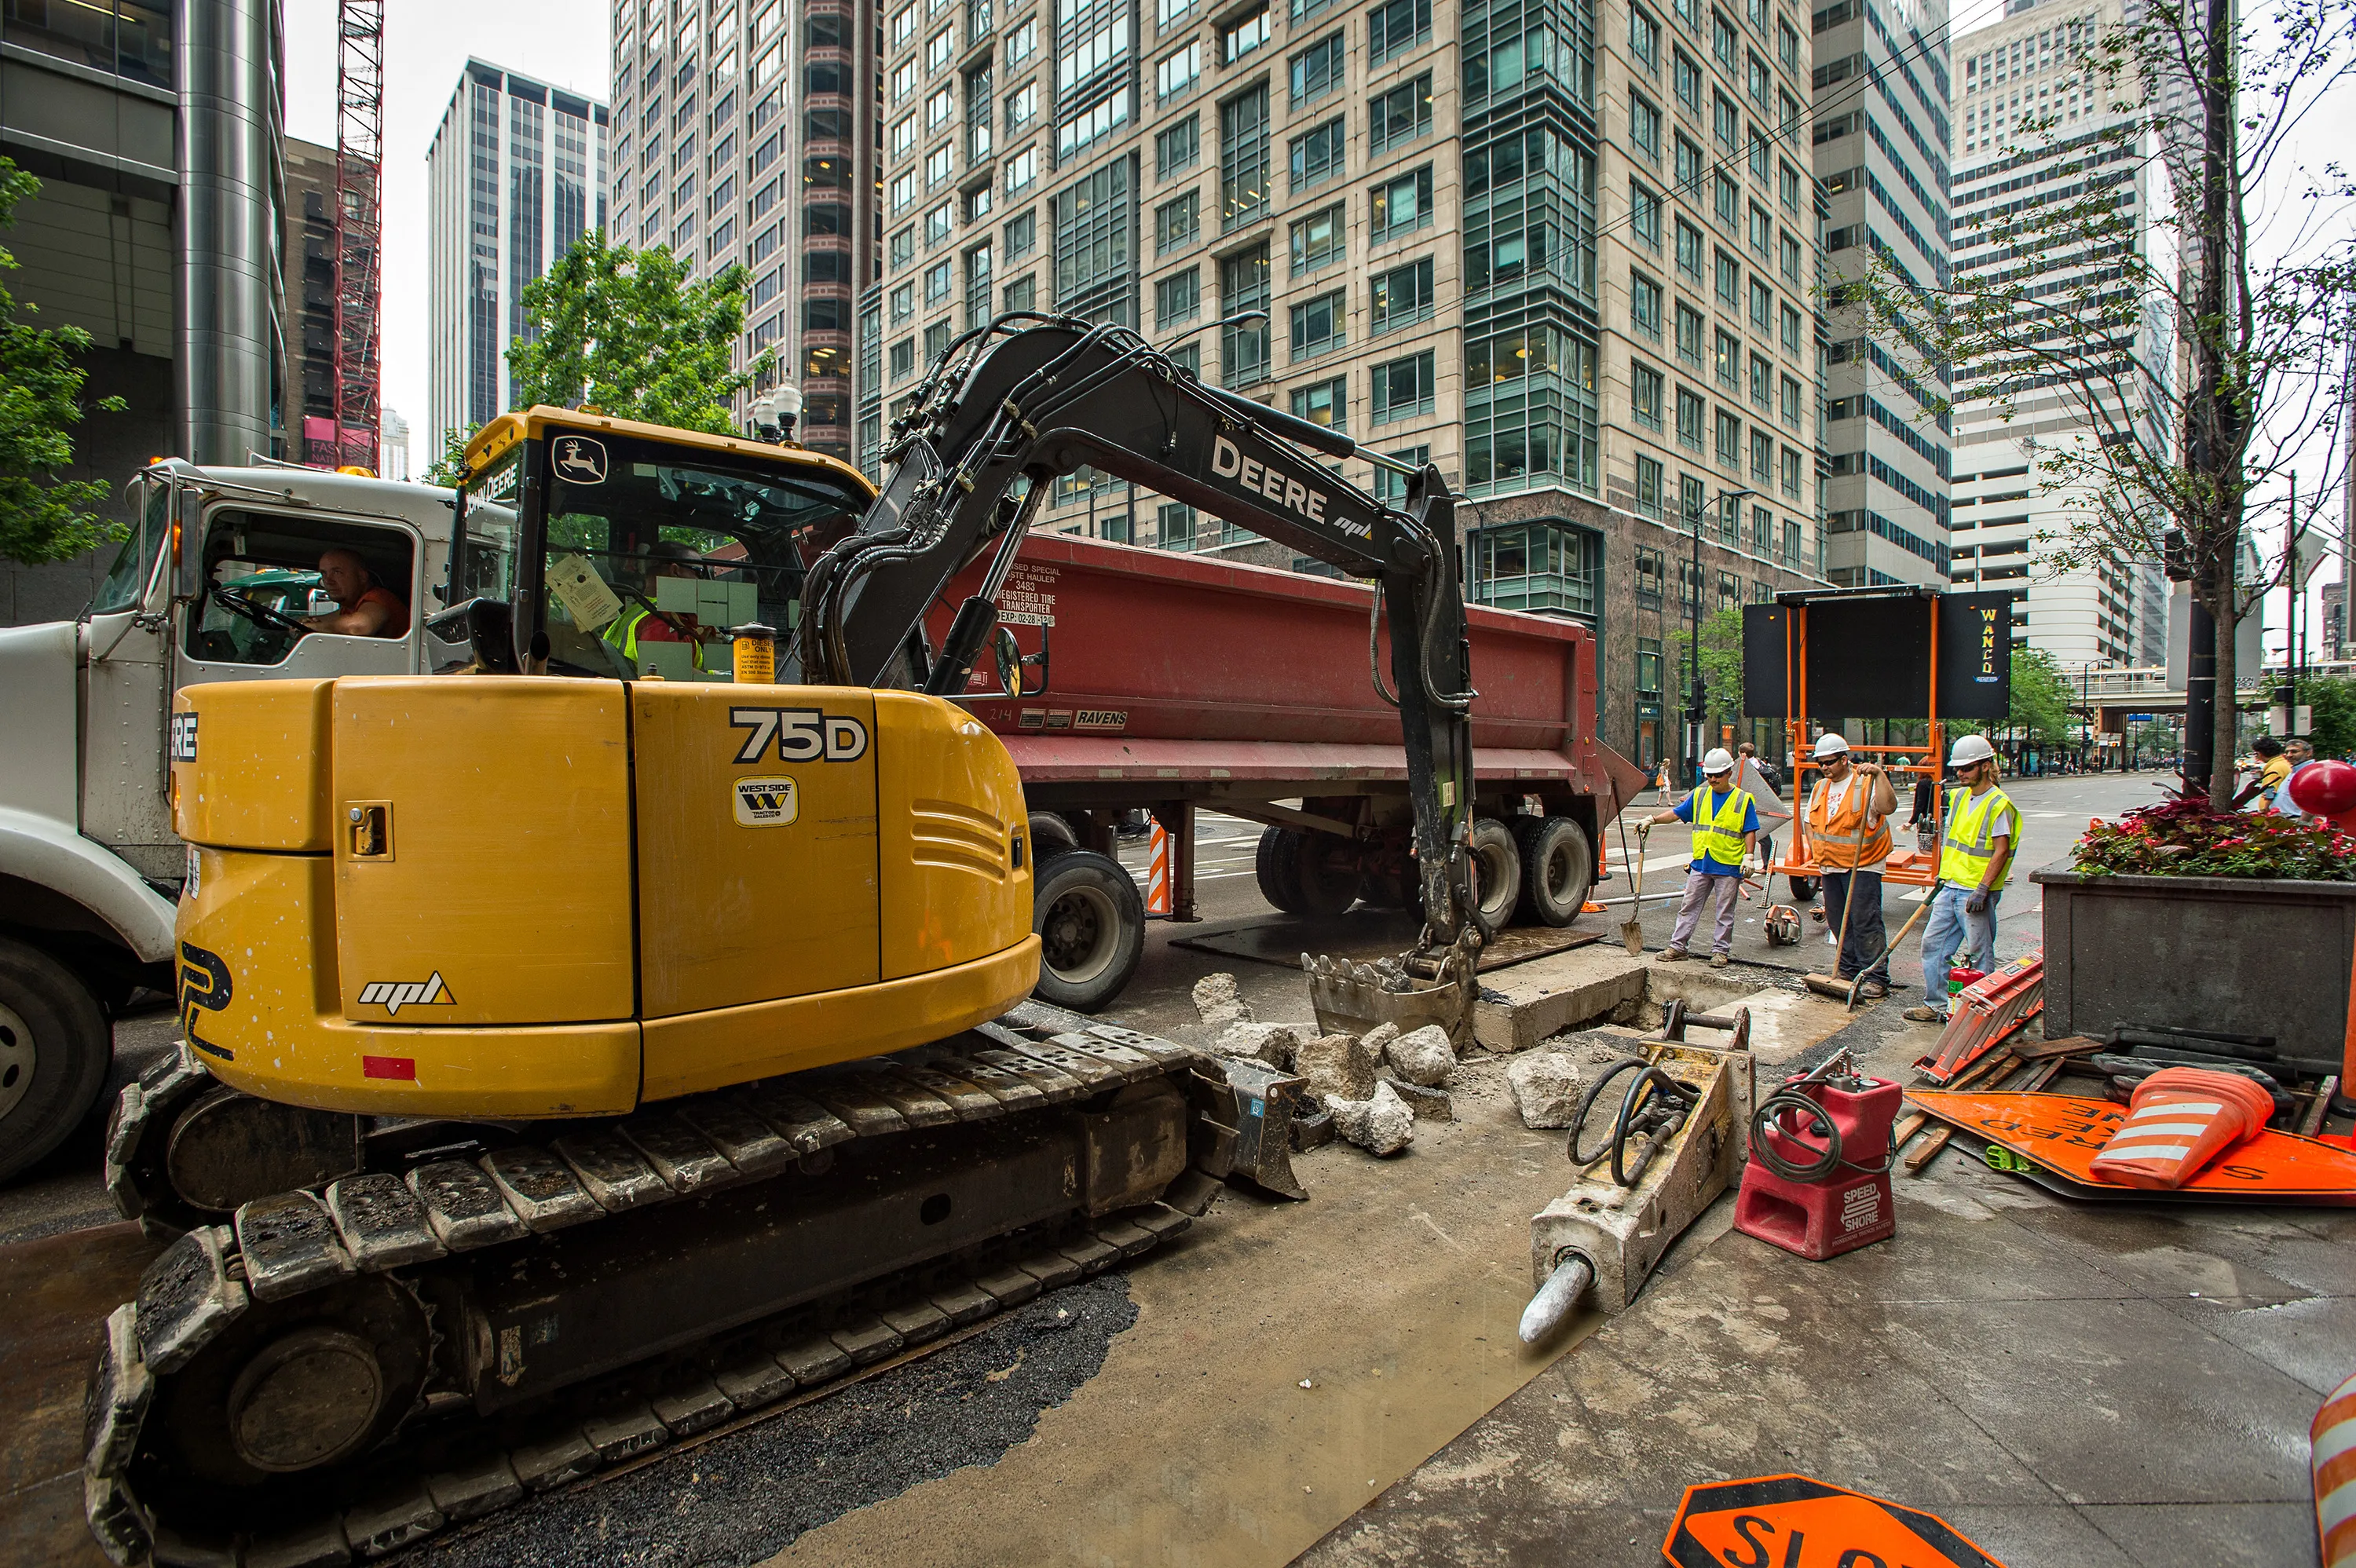 Road work in Chicago